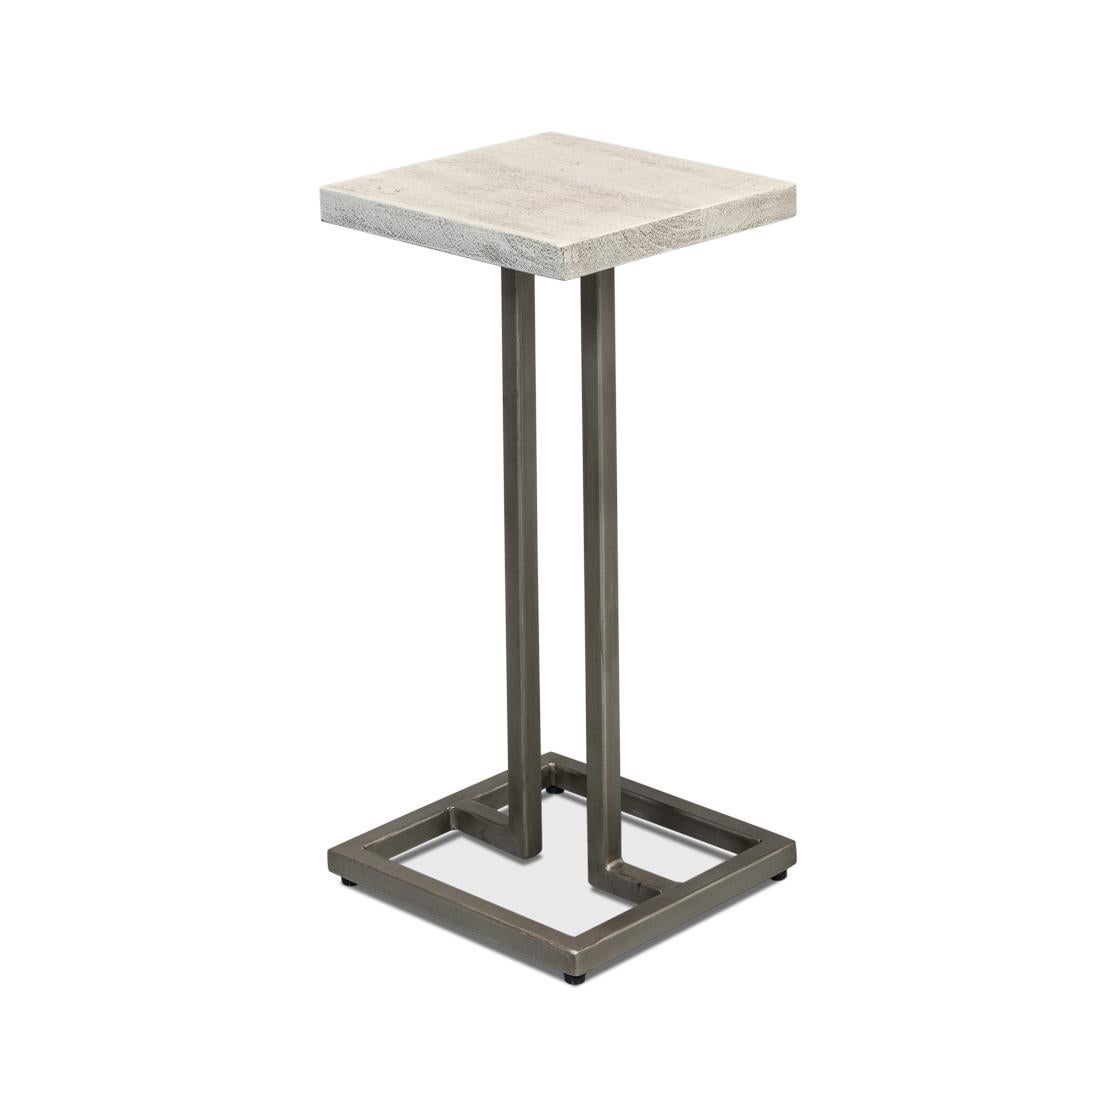 Asian Minimalist Industrial Drinks Table For Sale